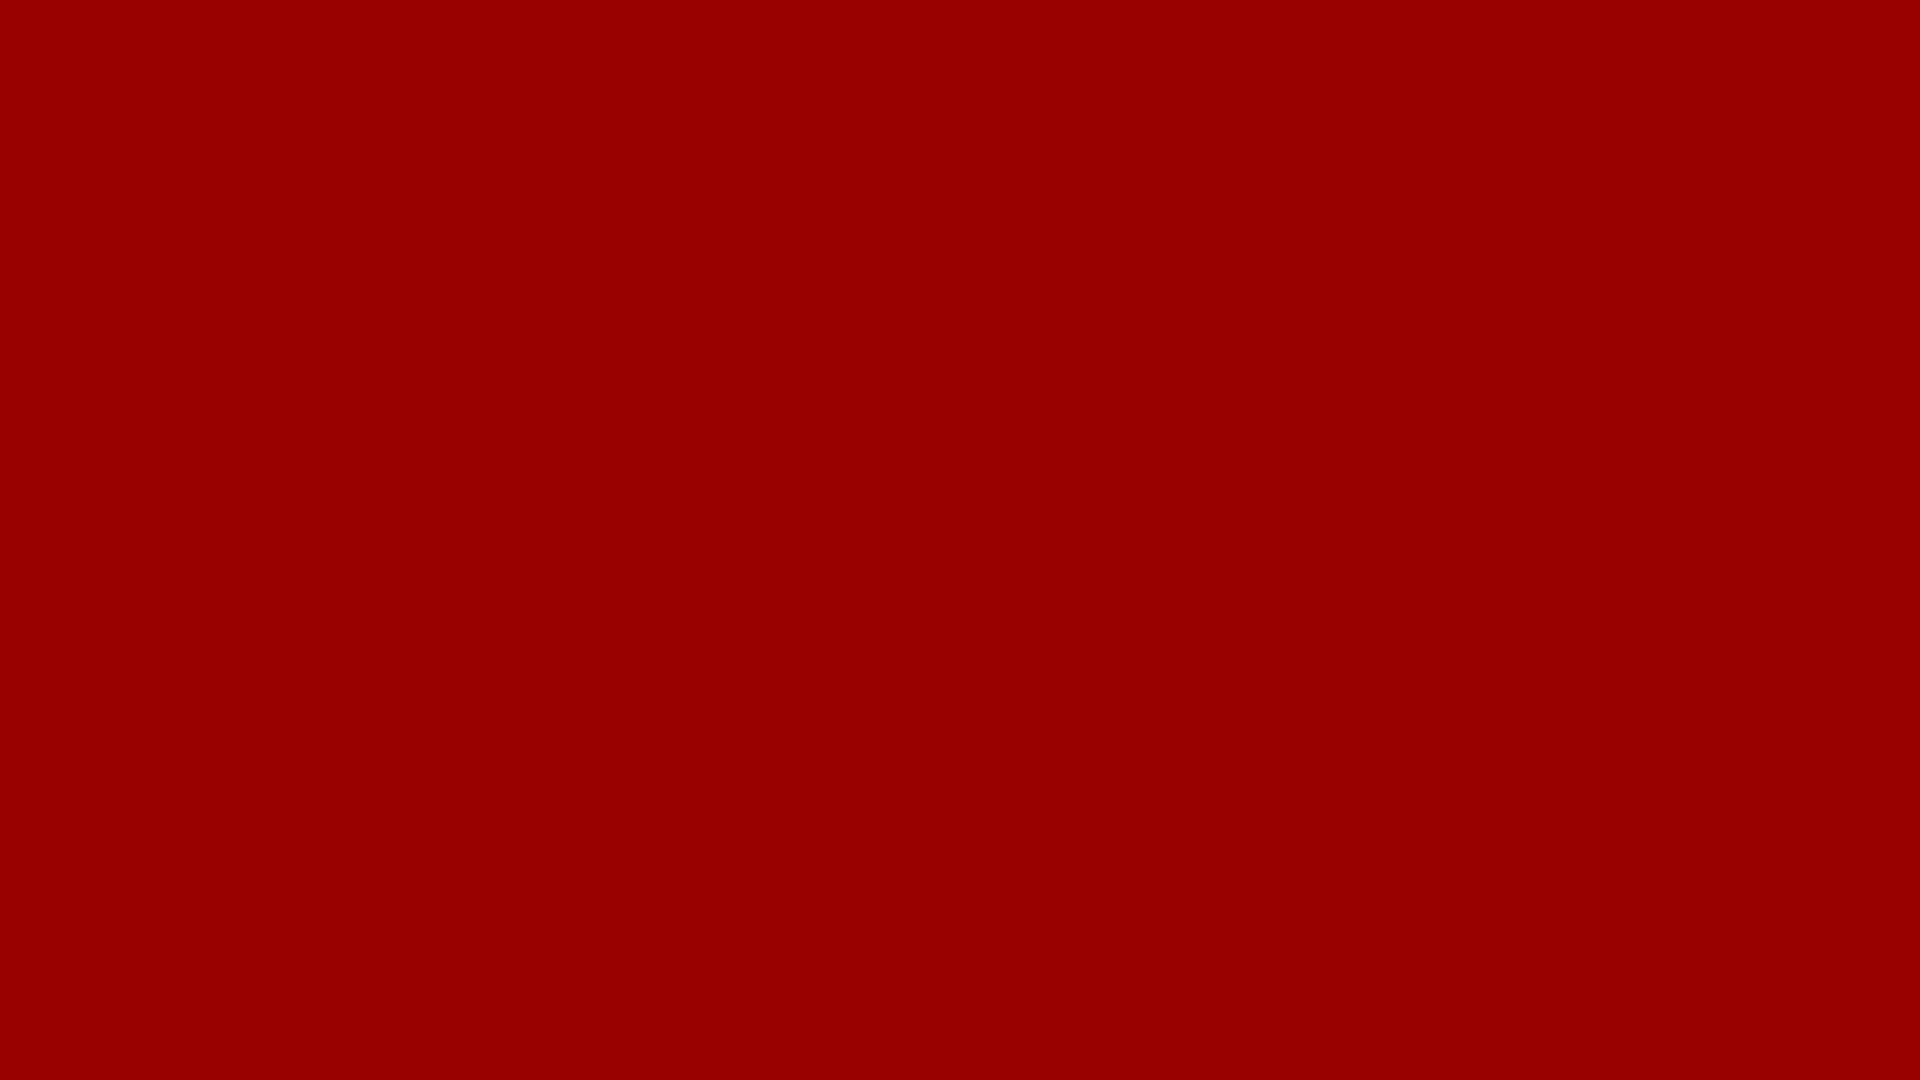 1920x1080 OU Crimson Red Solid Color Background